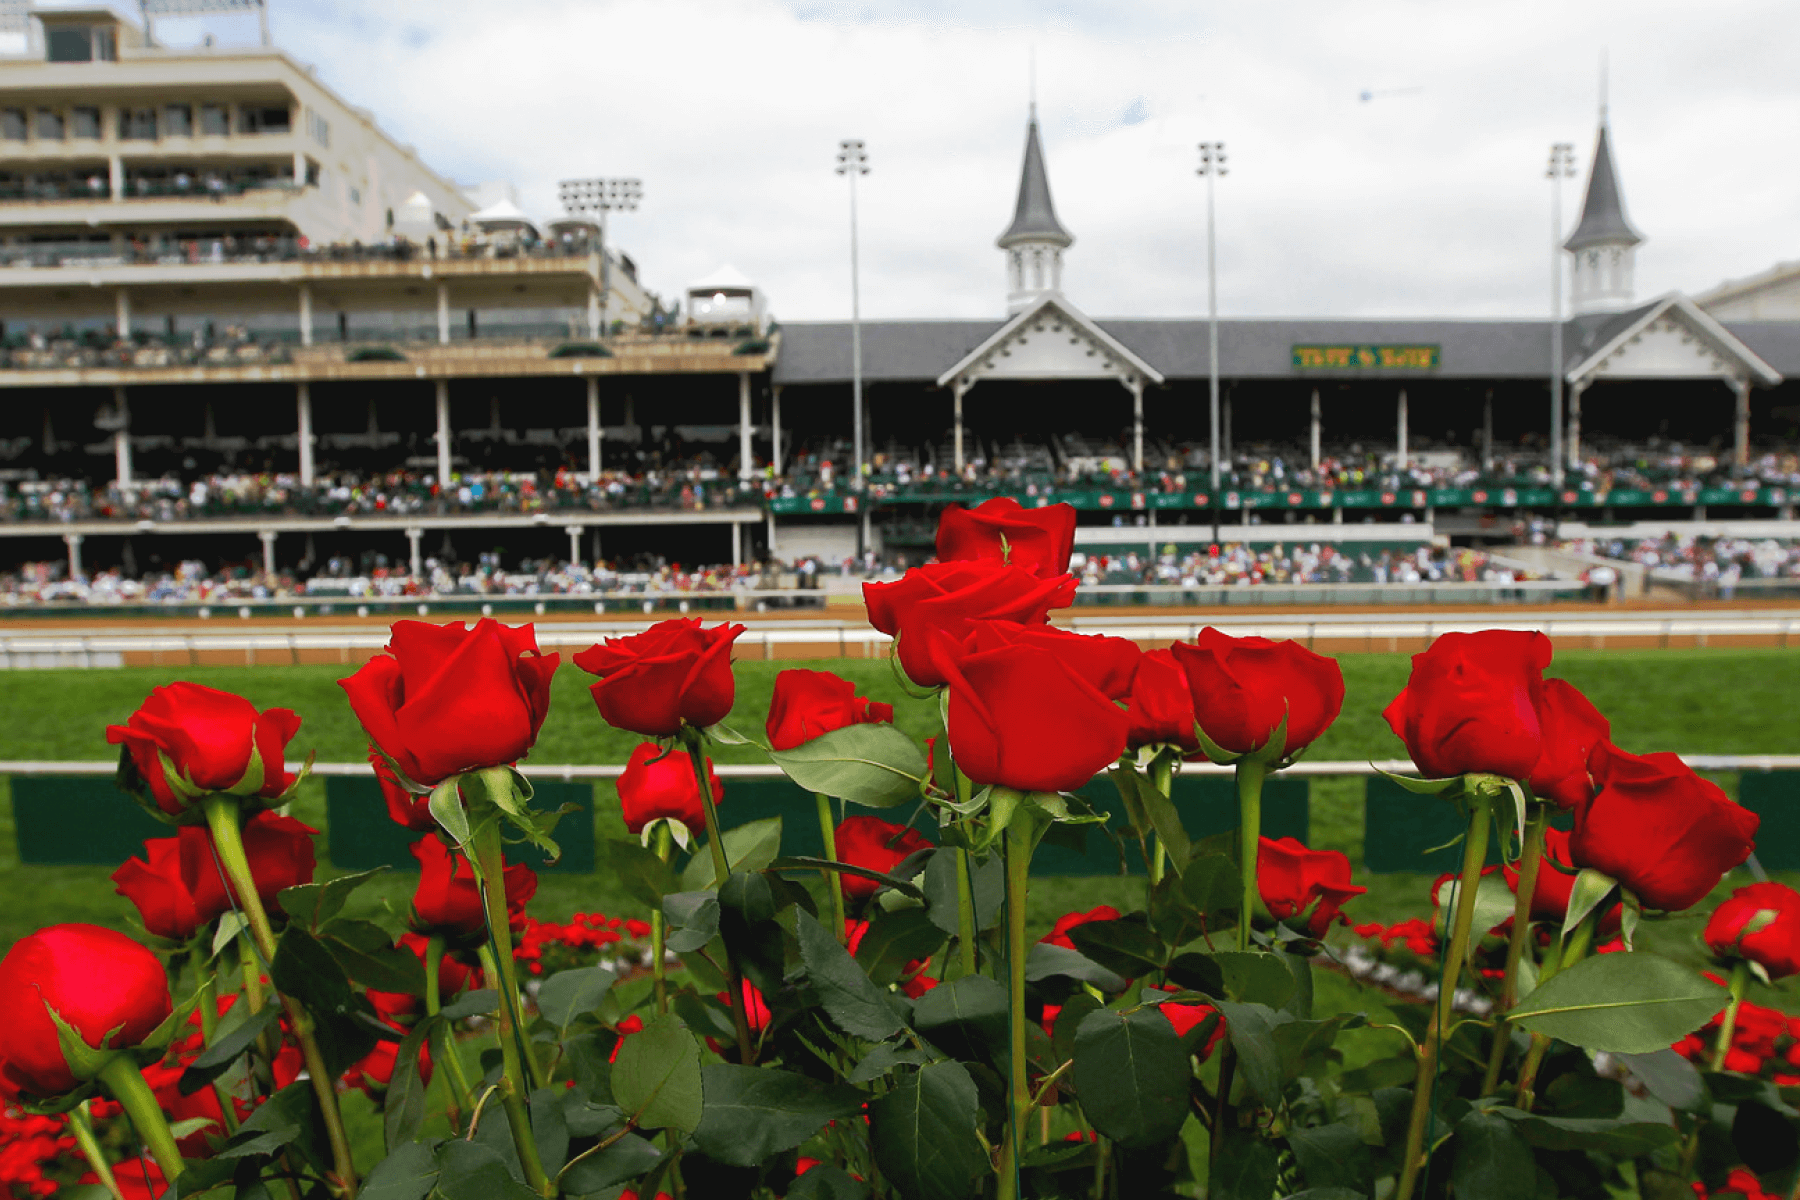 The Best Kentucky Derby Party Decorations and Hosting Tips 